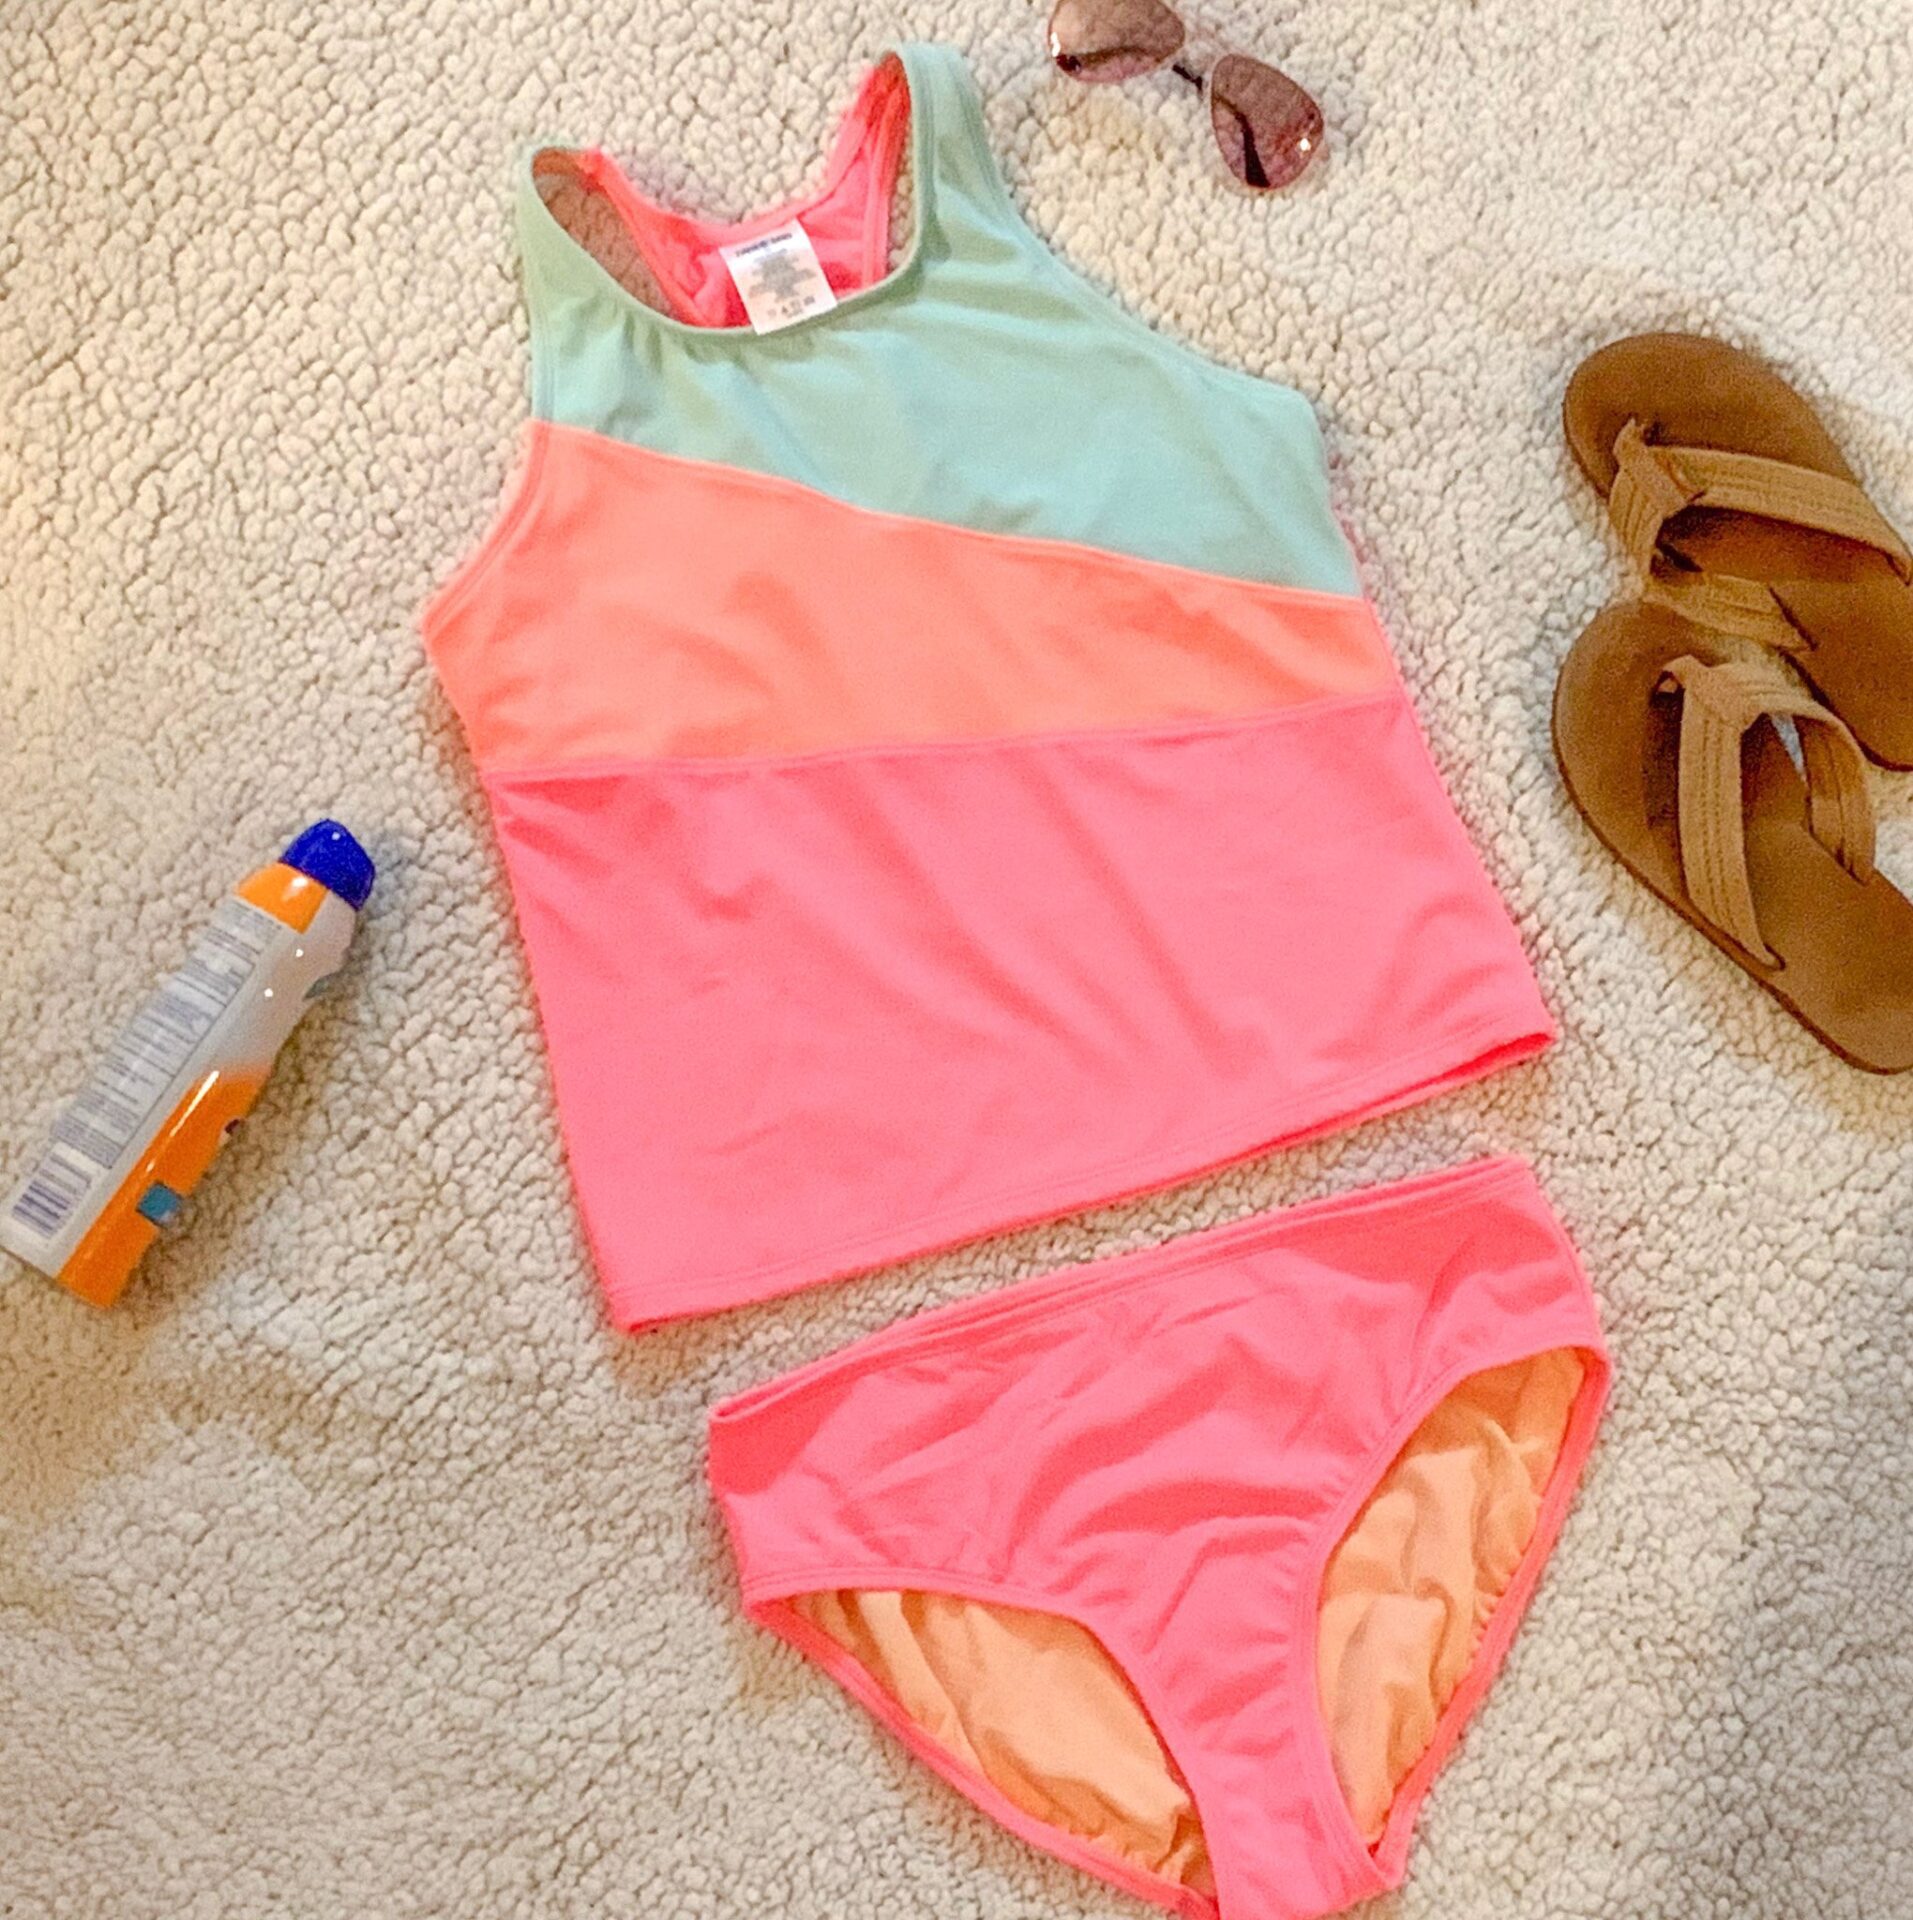 Modest Swimsuits for Tweens